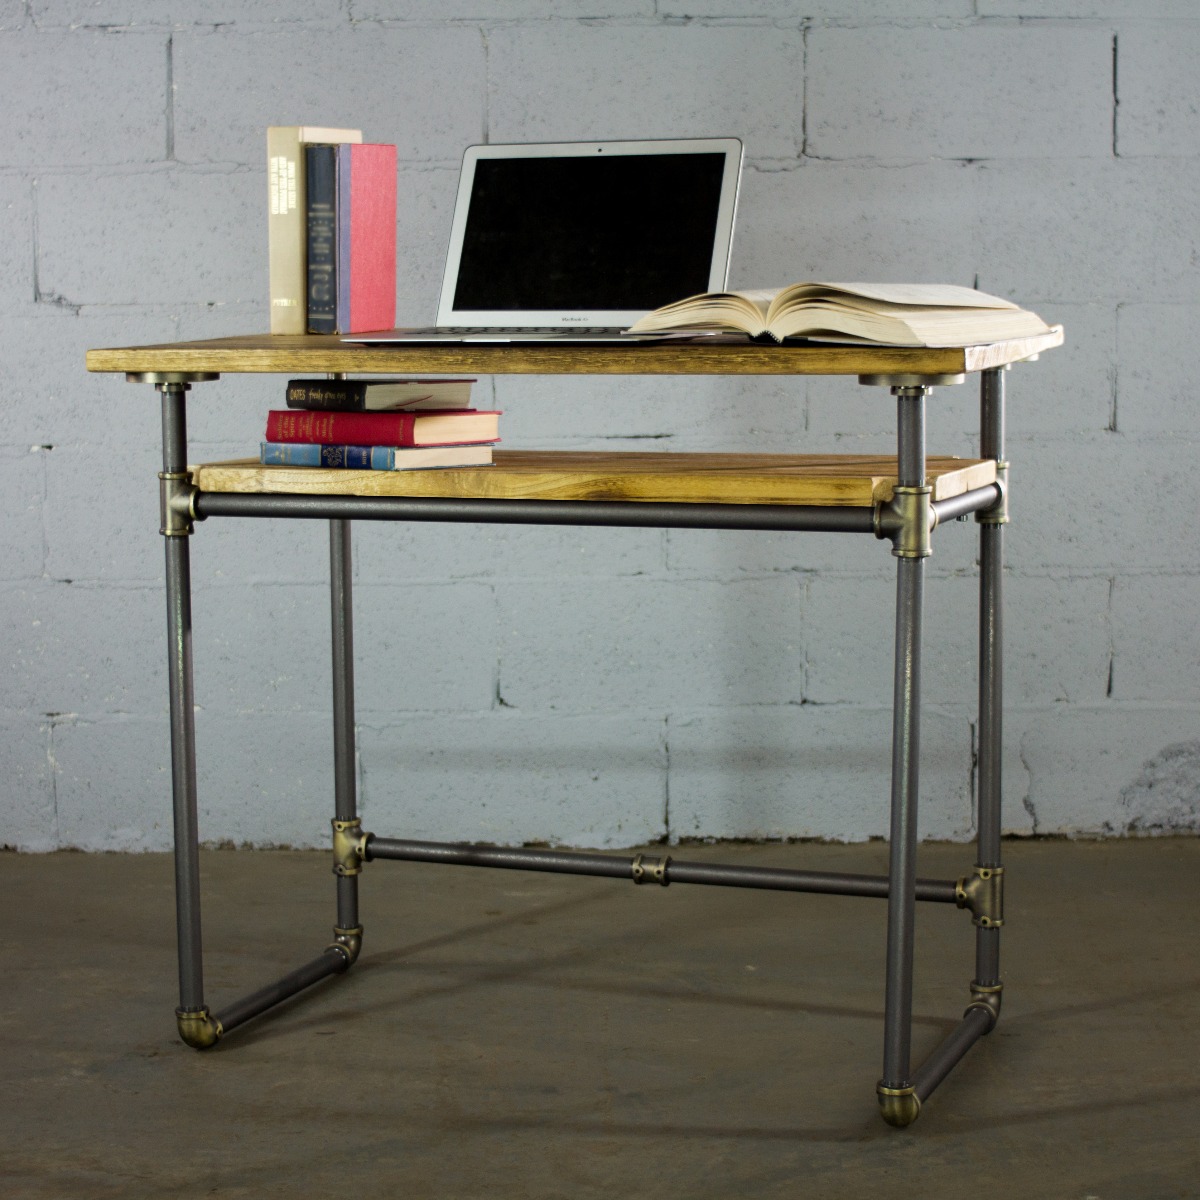 Dsk1-br-gr-na Berkeley Industrial Mid-century Writing Desk, Brushed Brass Gray Steel Combo With Natural Stained Wood